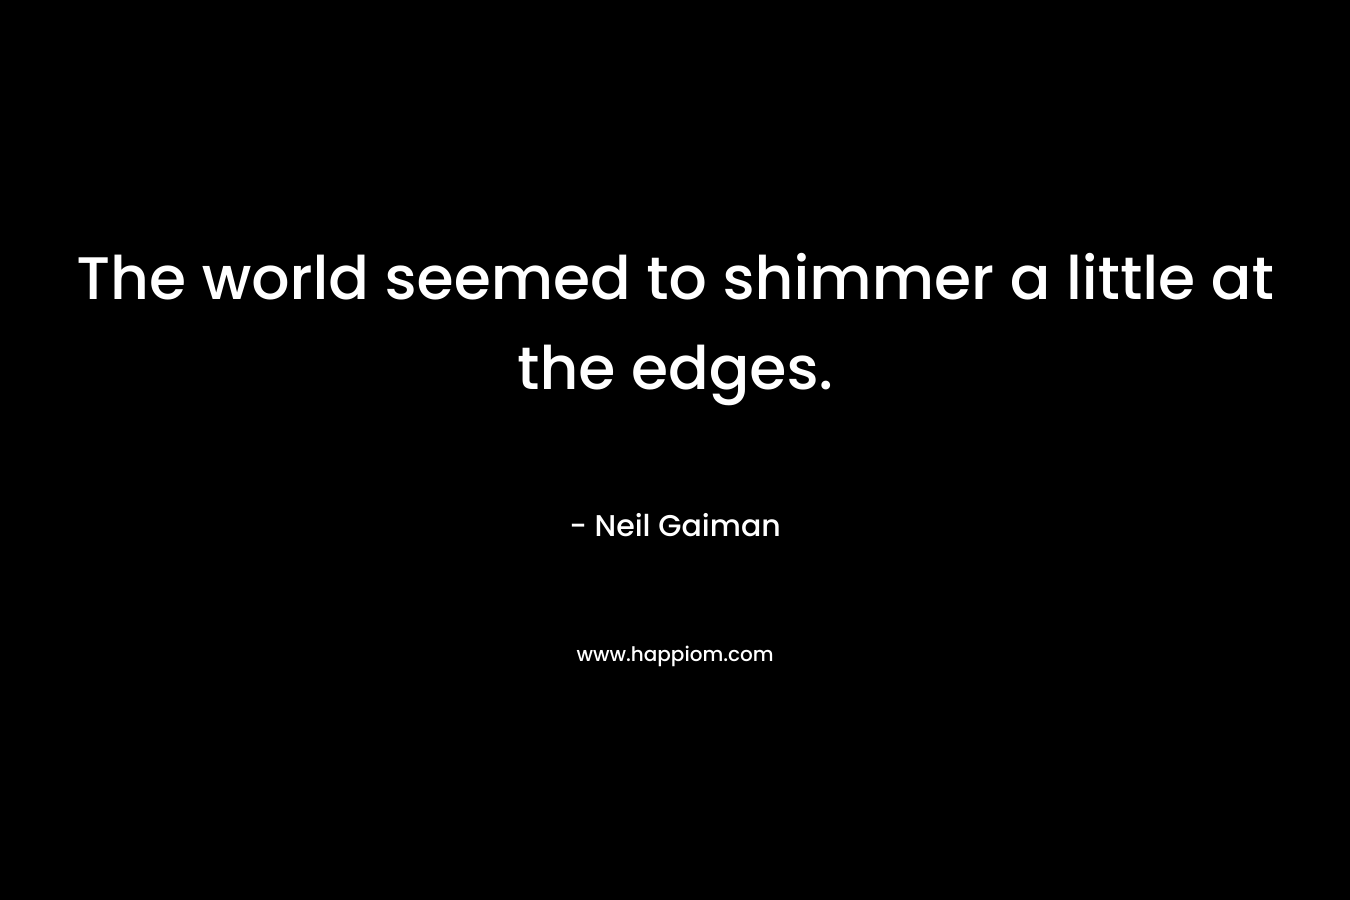 The world seemed to shimmer a little at the edges.